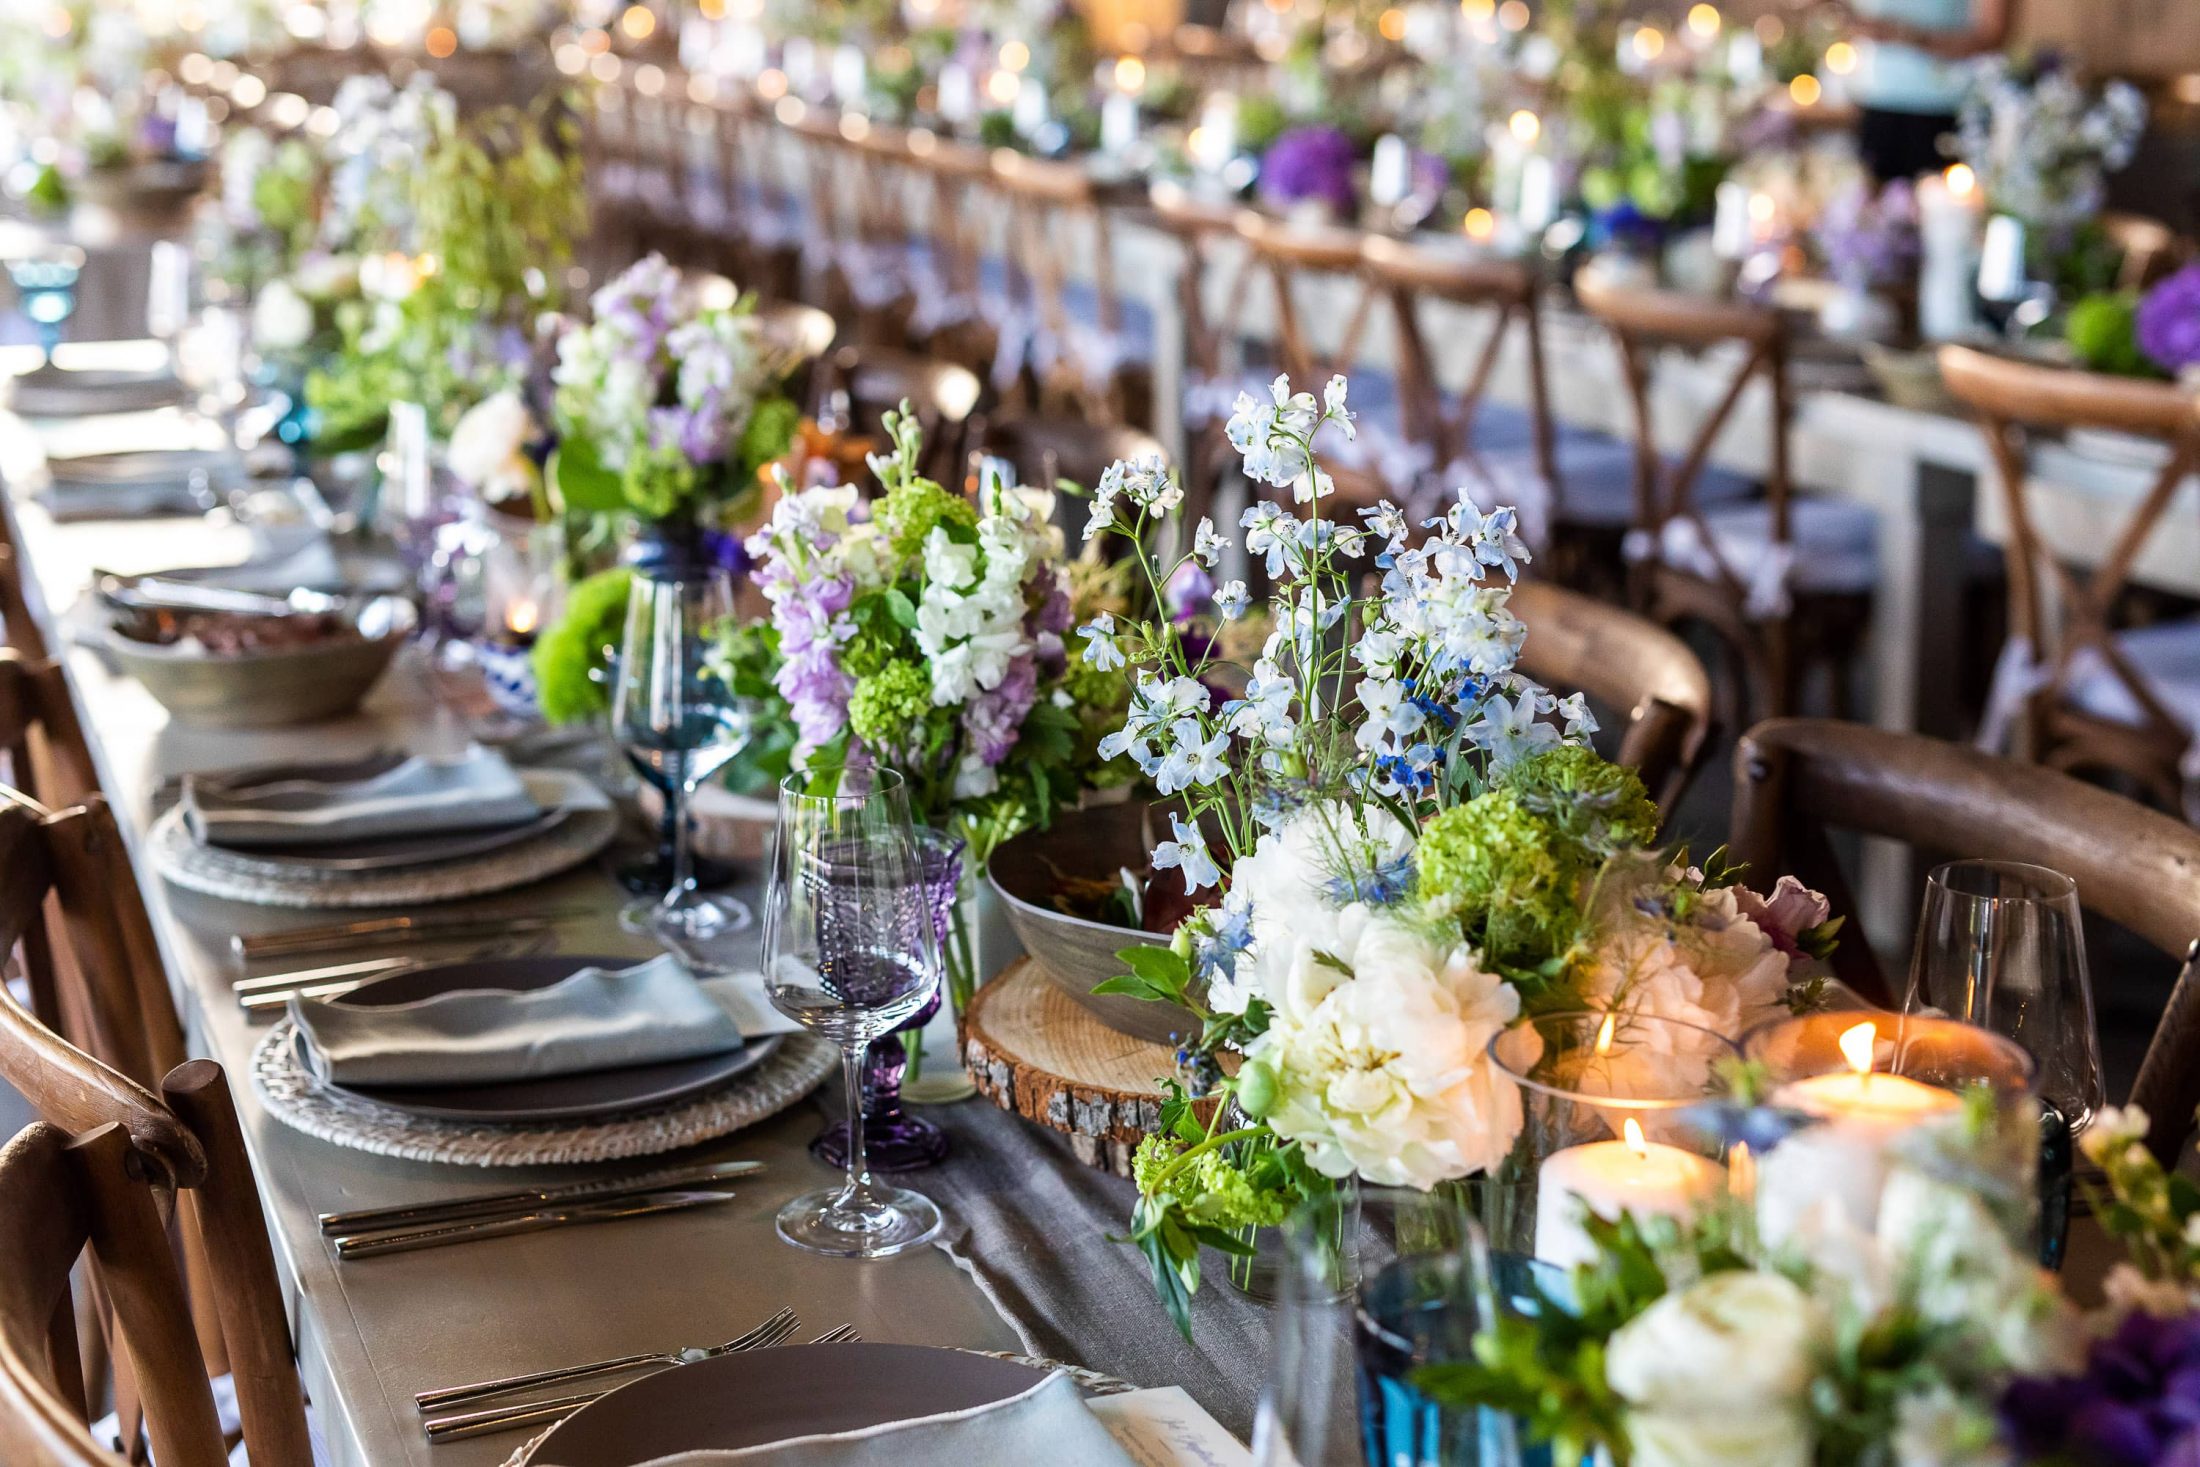 Table decor at reception at this Hamptons wedding weekend held at The Parrish Museum | Photo by Roey Yohai Studio